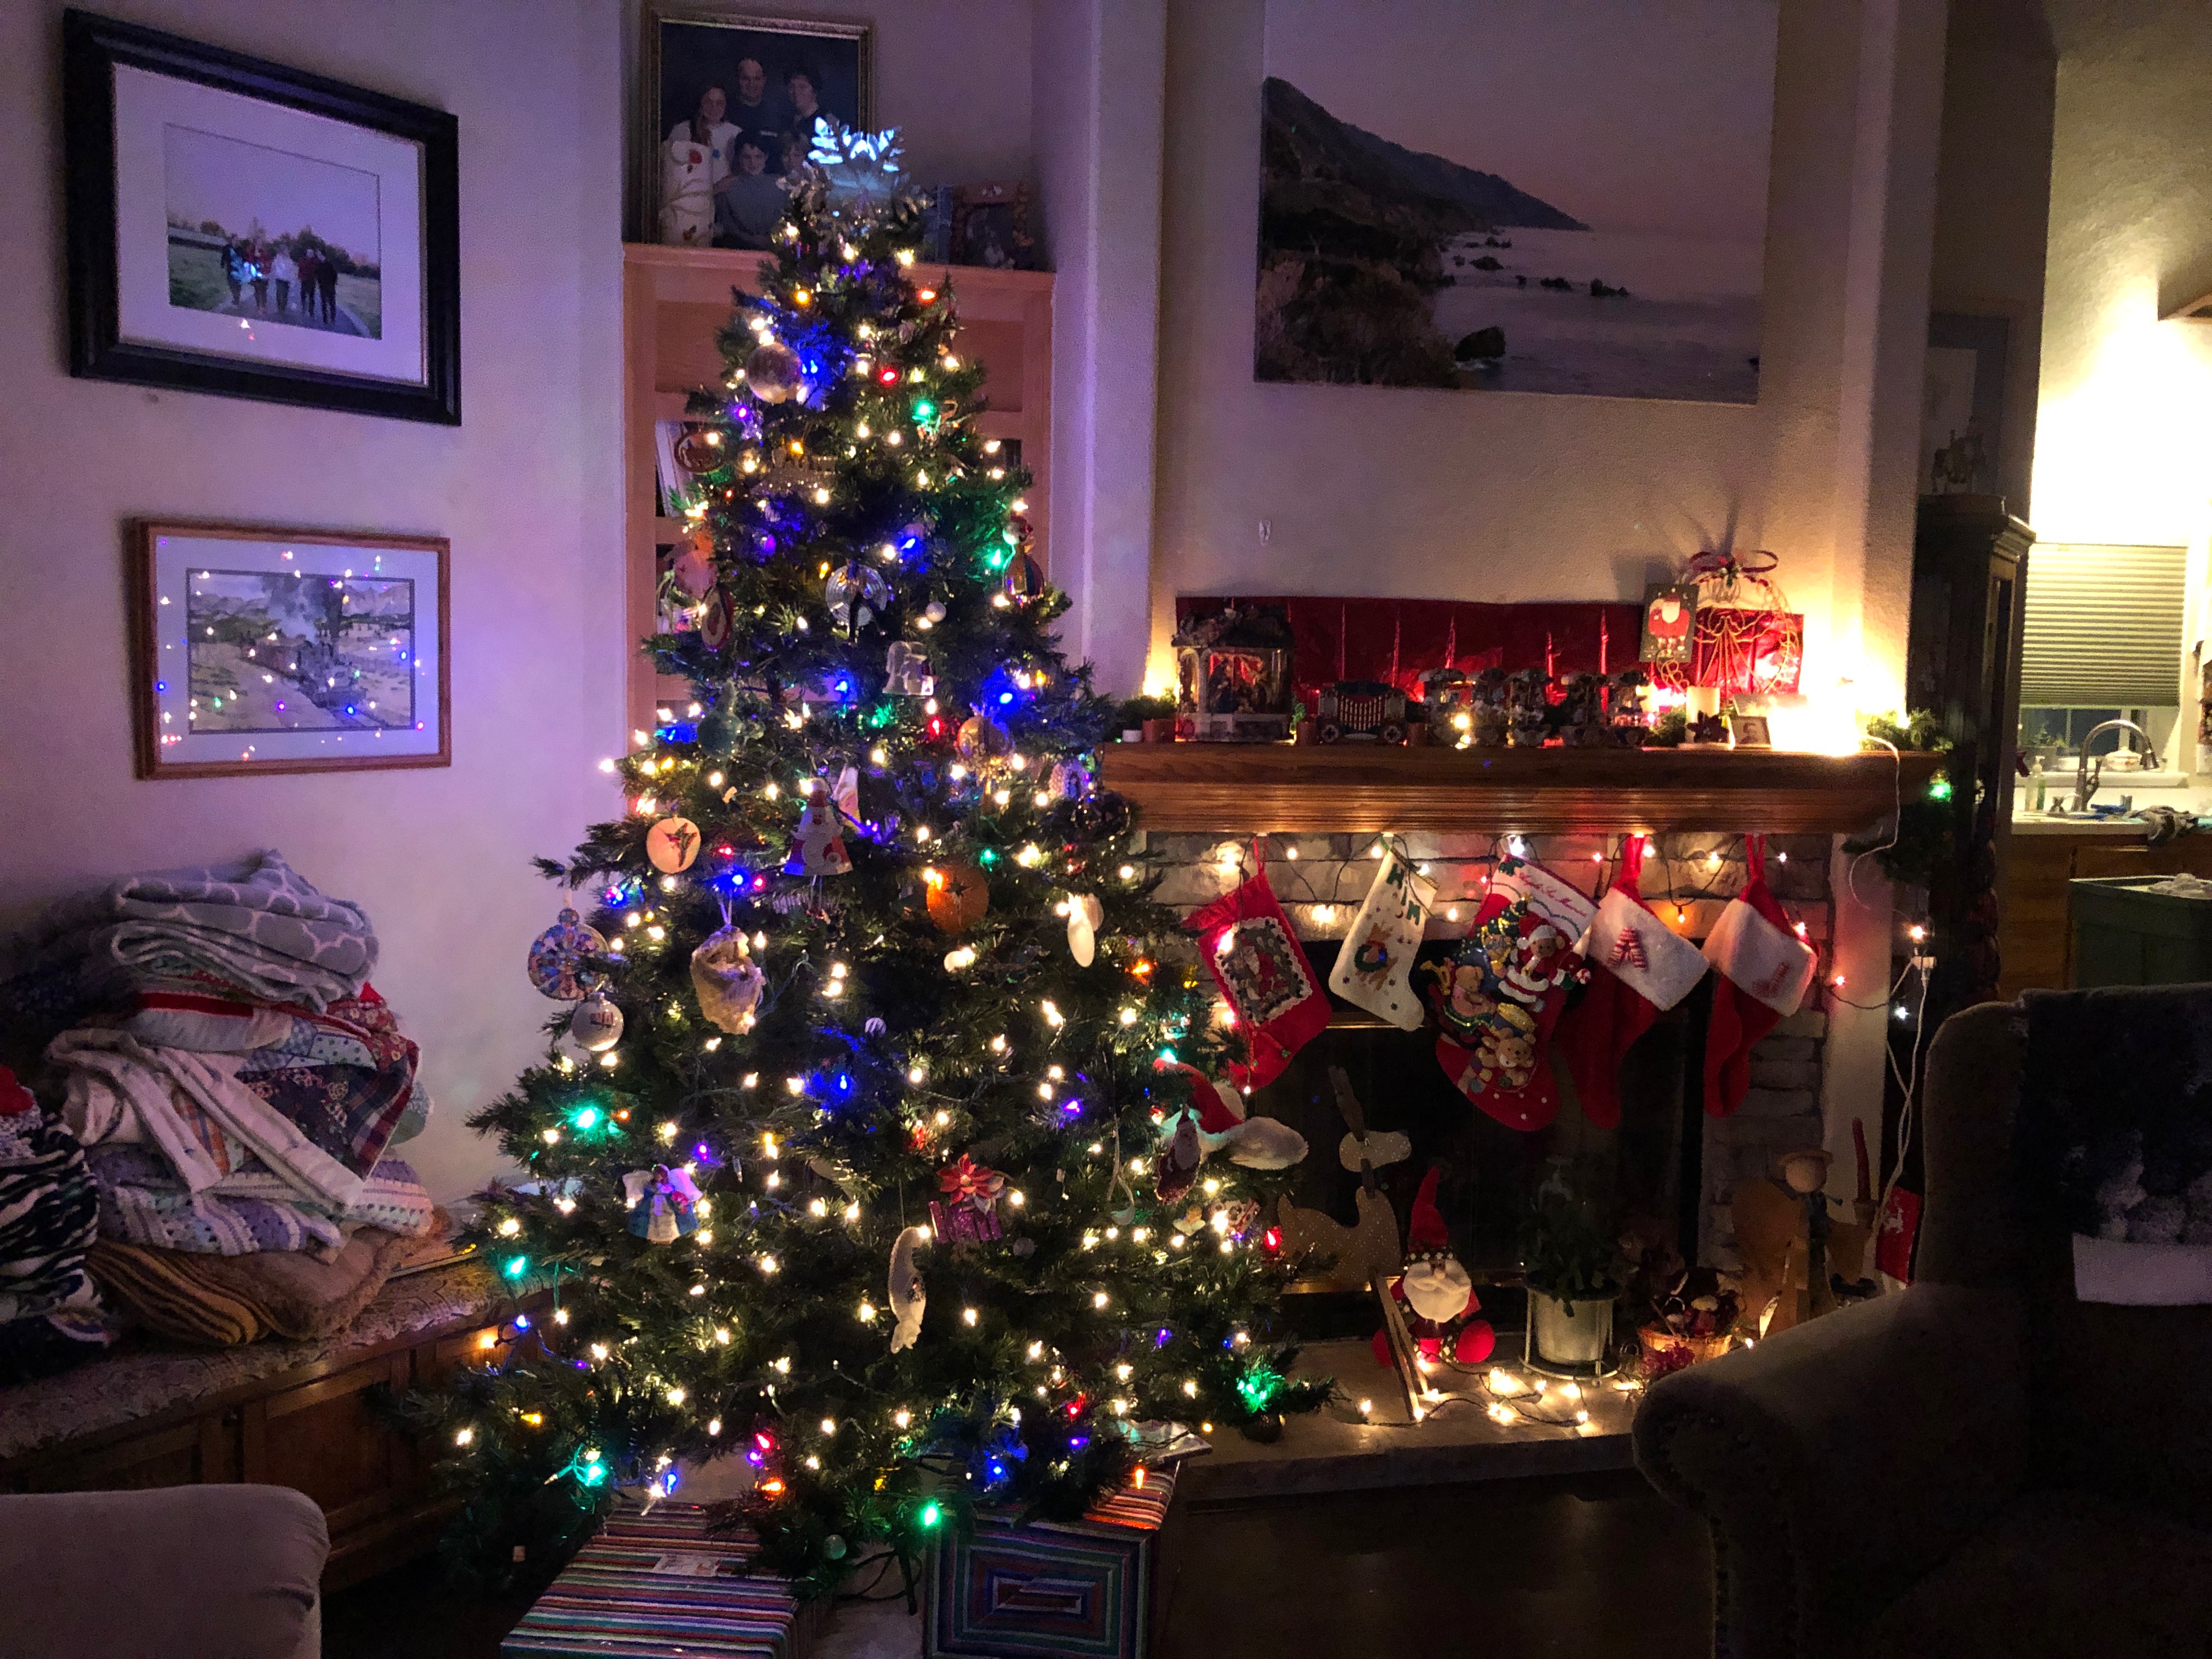 wide view of Christmas tree lit up with ornaments and a fireplace with stockings and decorations